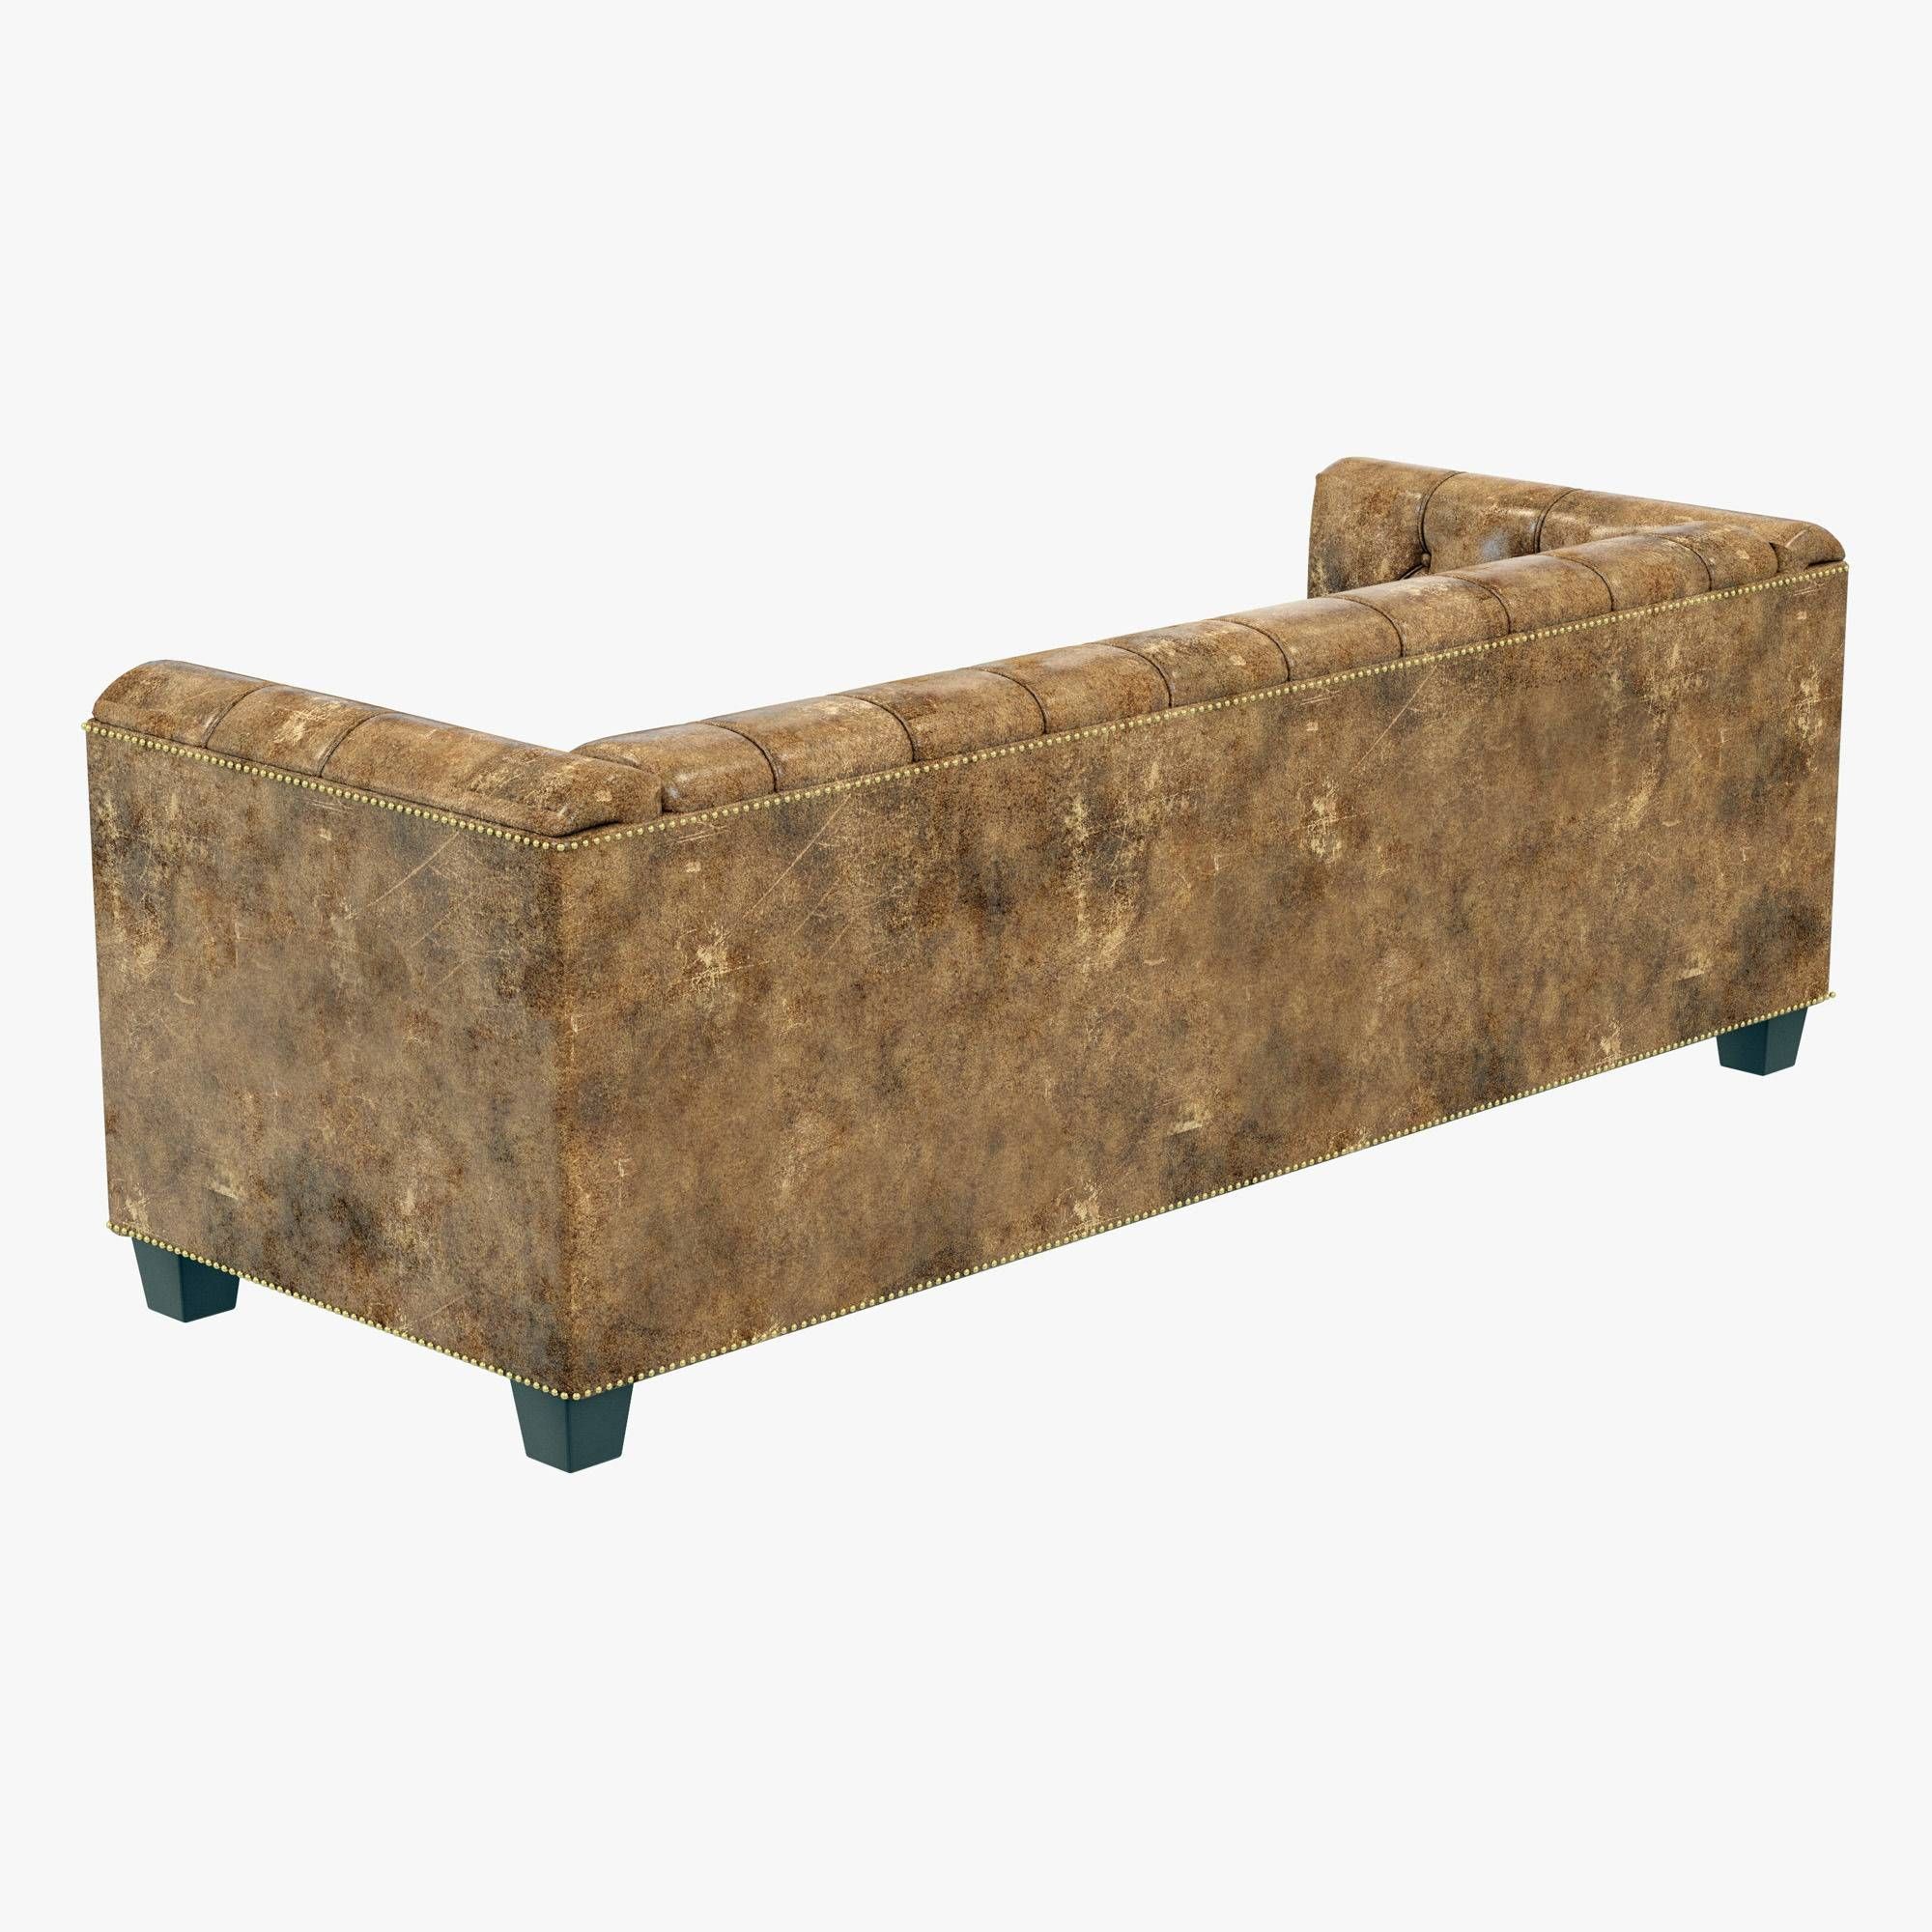 Restoration Hardware Savoy Leather Sofa 3d Model Pertaining To Savoy Leather Sofas (View 8 of 15)